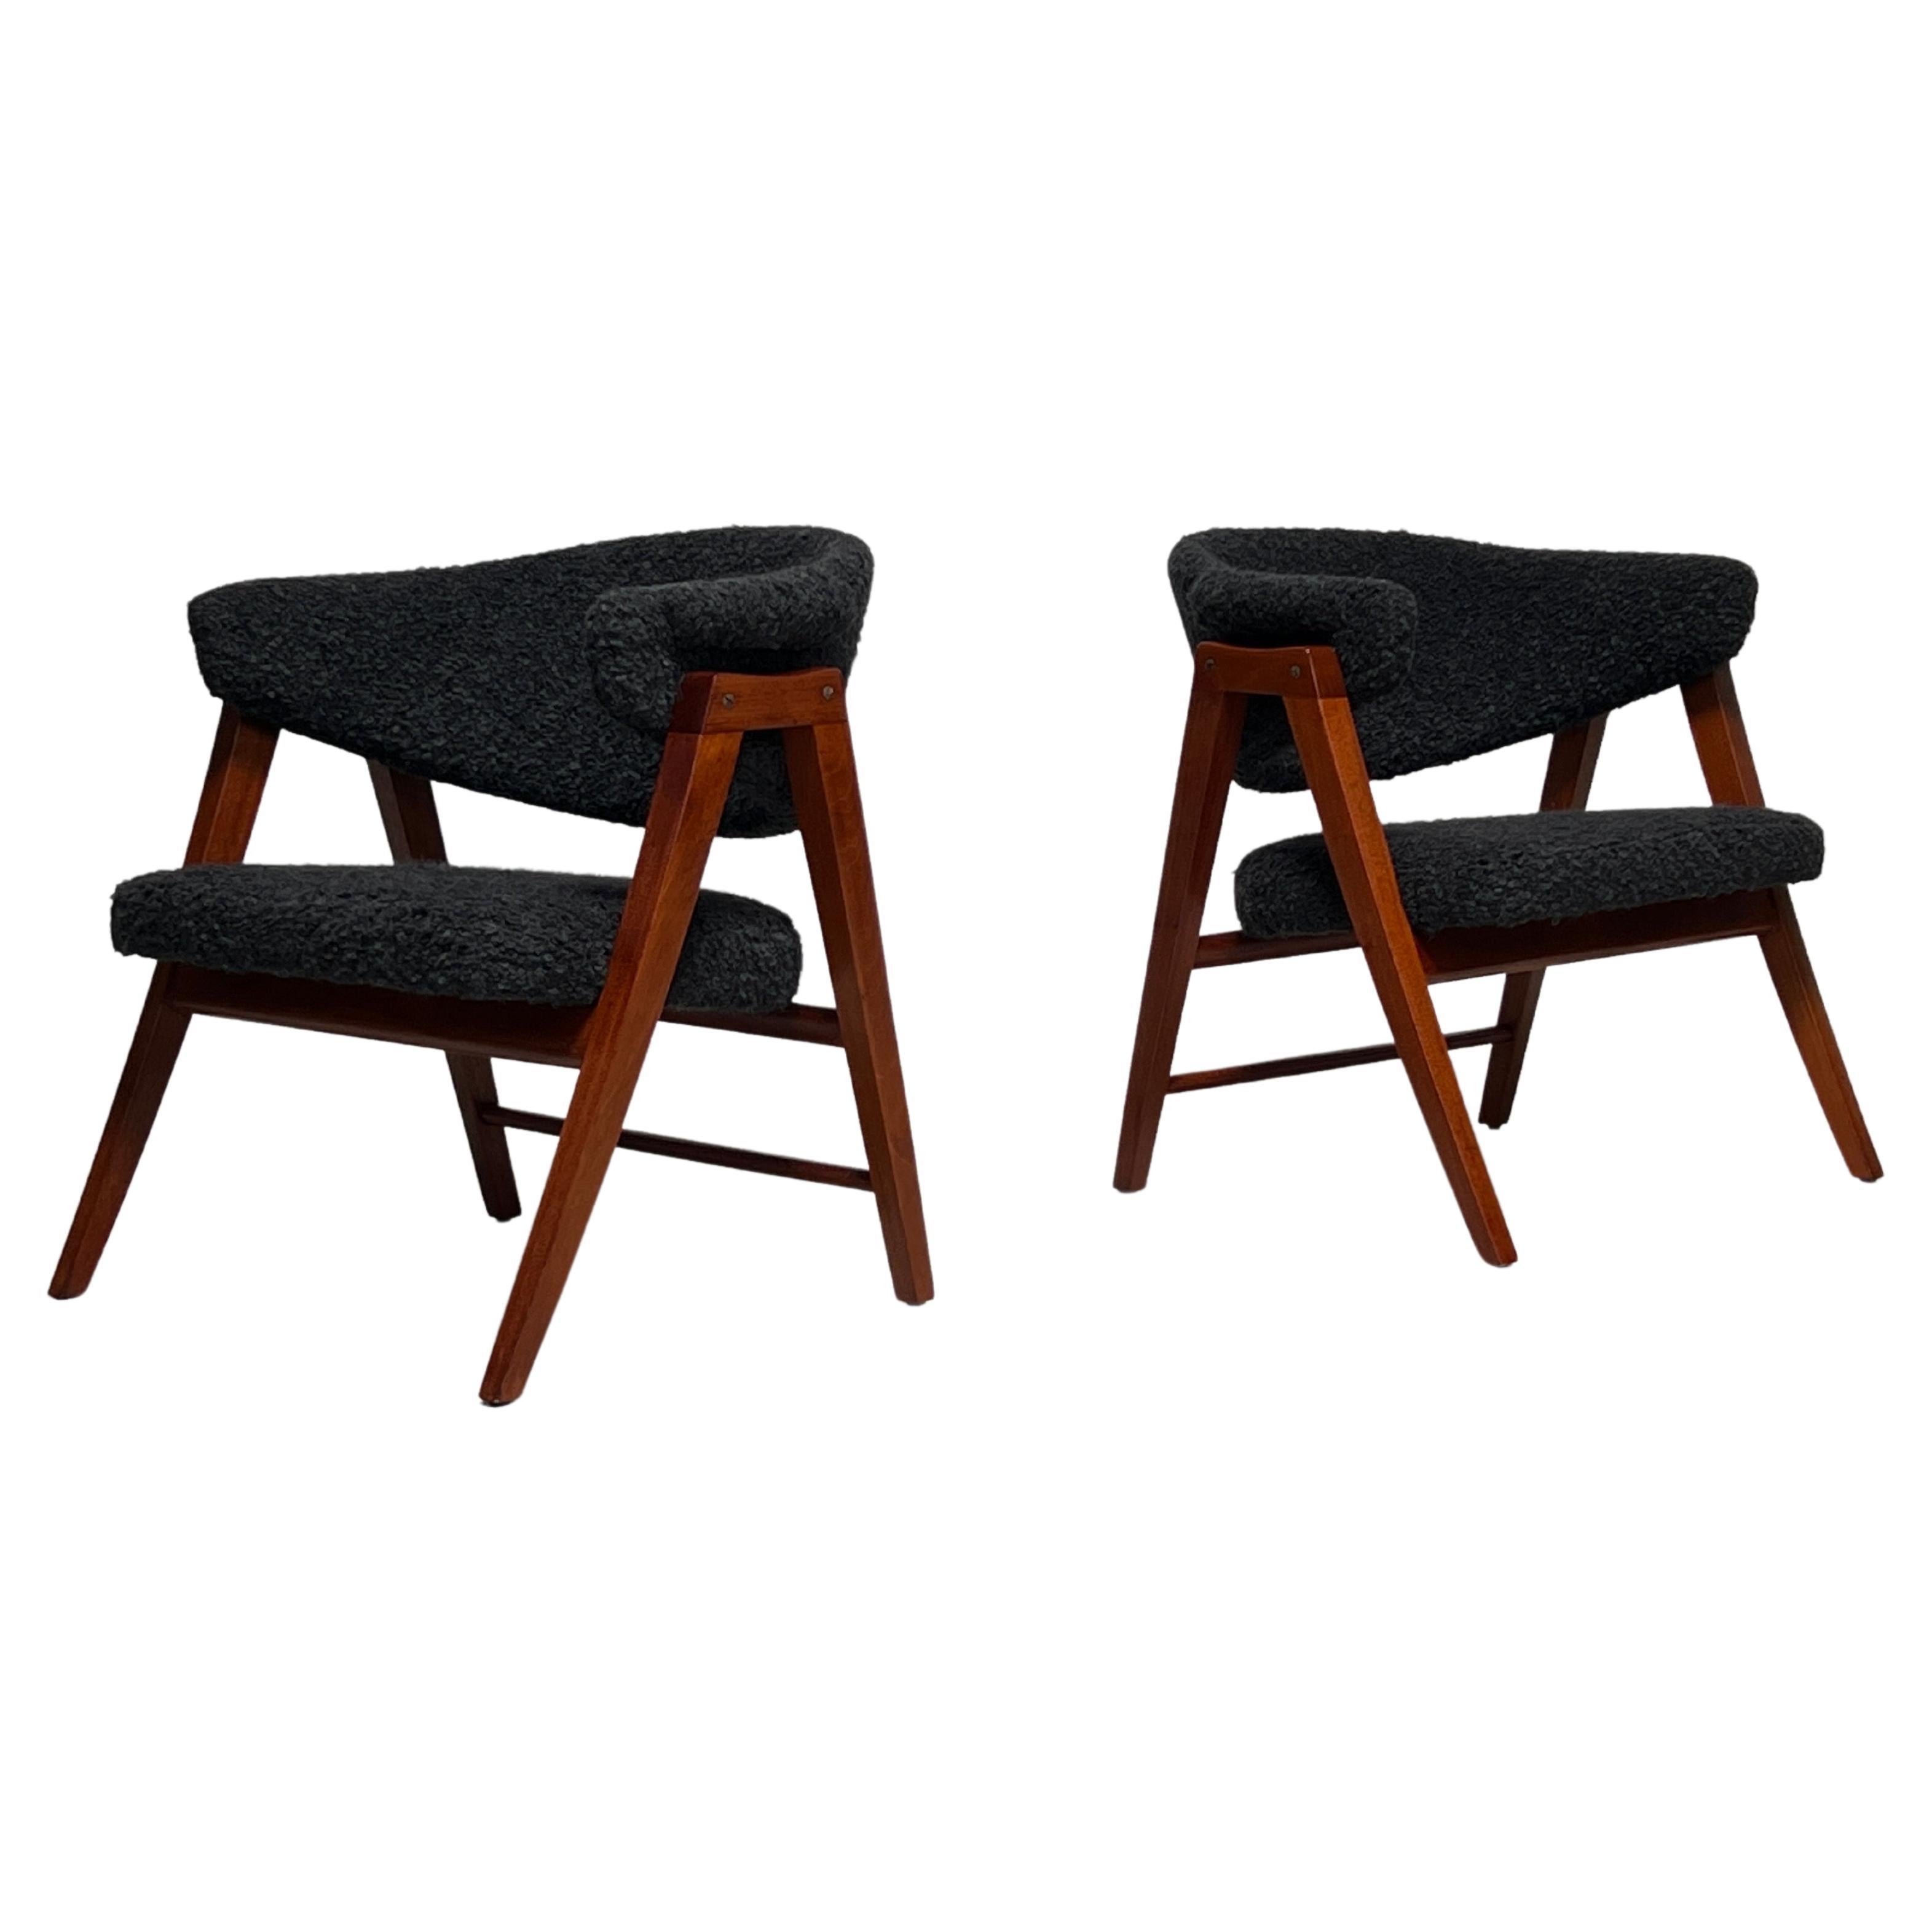 Pair of Dunbar "A" Frame Lounge Chairs by Edward Wormley